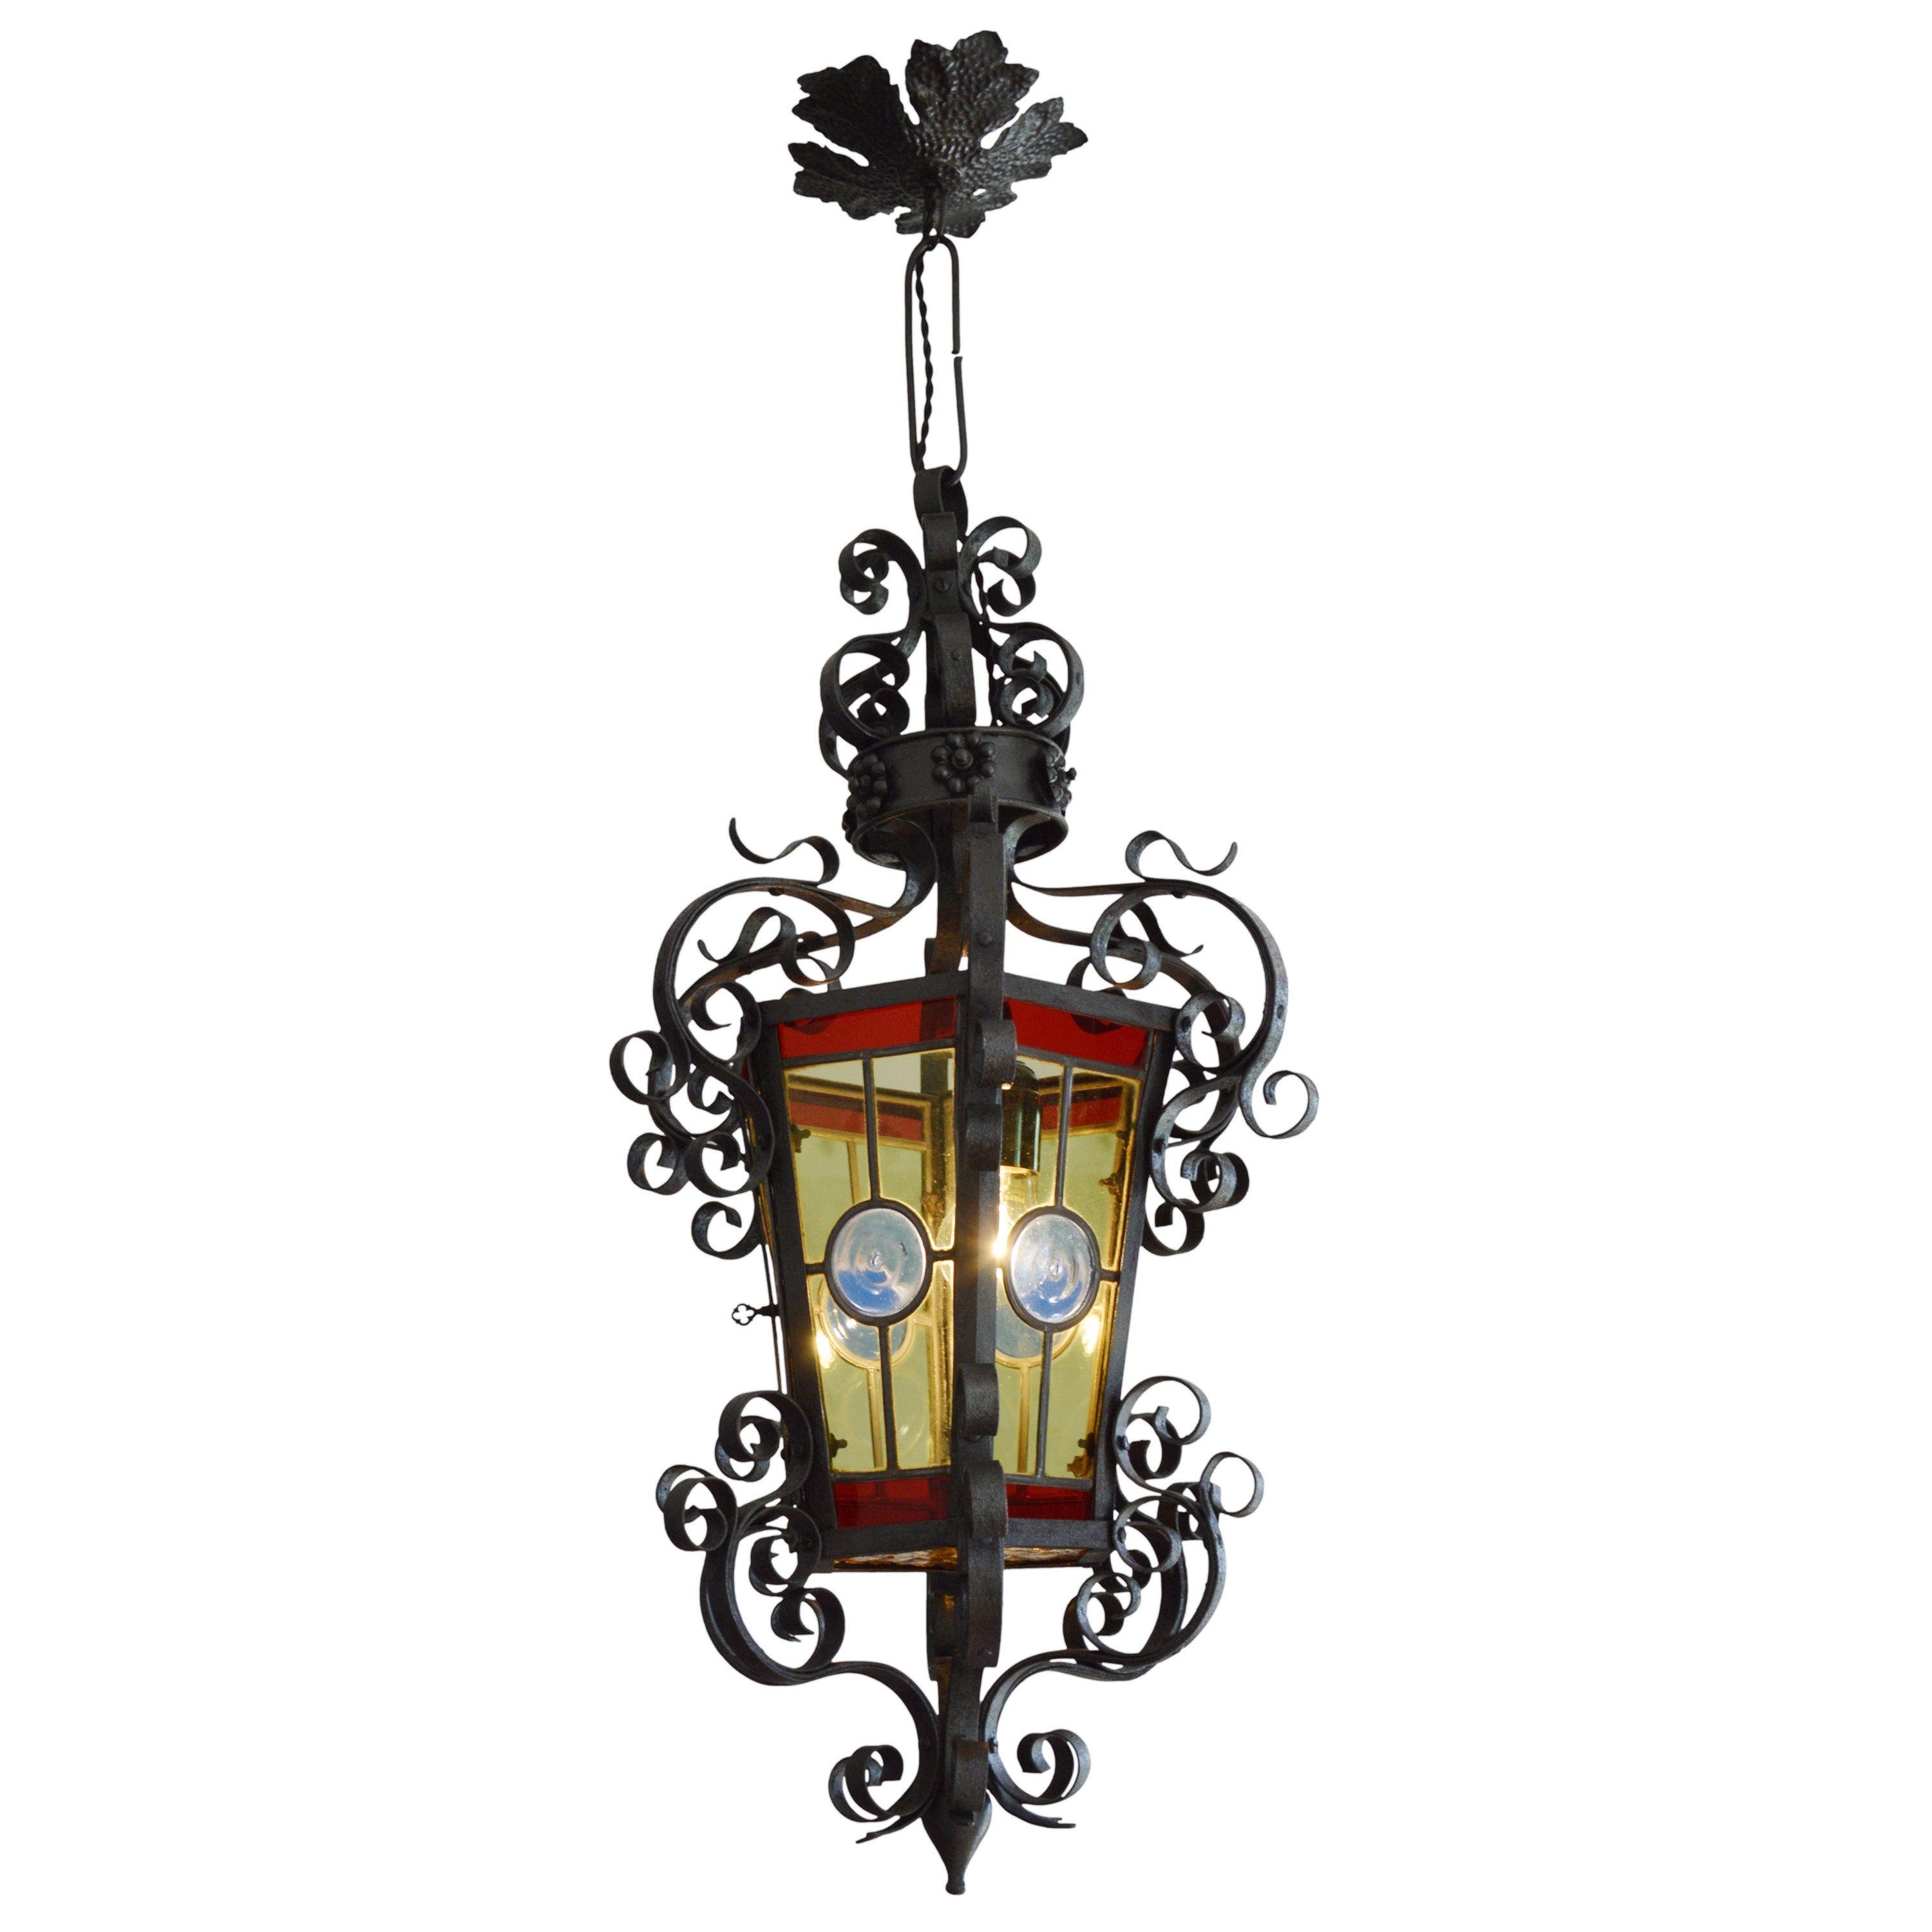 French Art Nouveau Stained-Glass Lantern, 1890-1900